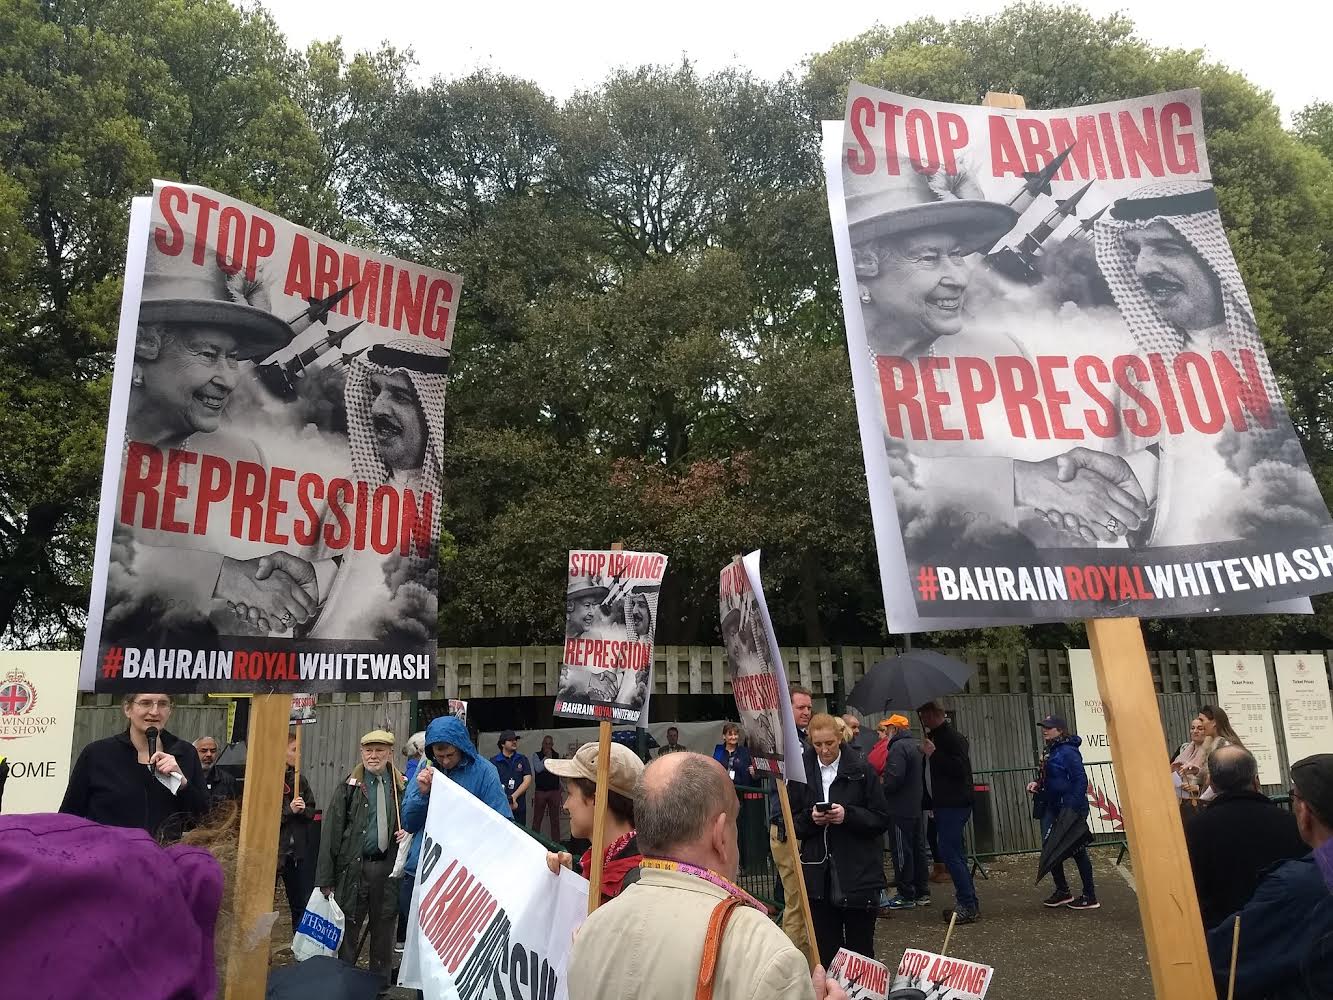 Image of protesters outside Windsor horse how with banners saying stop arming